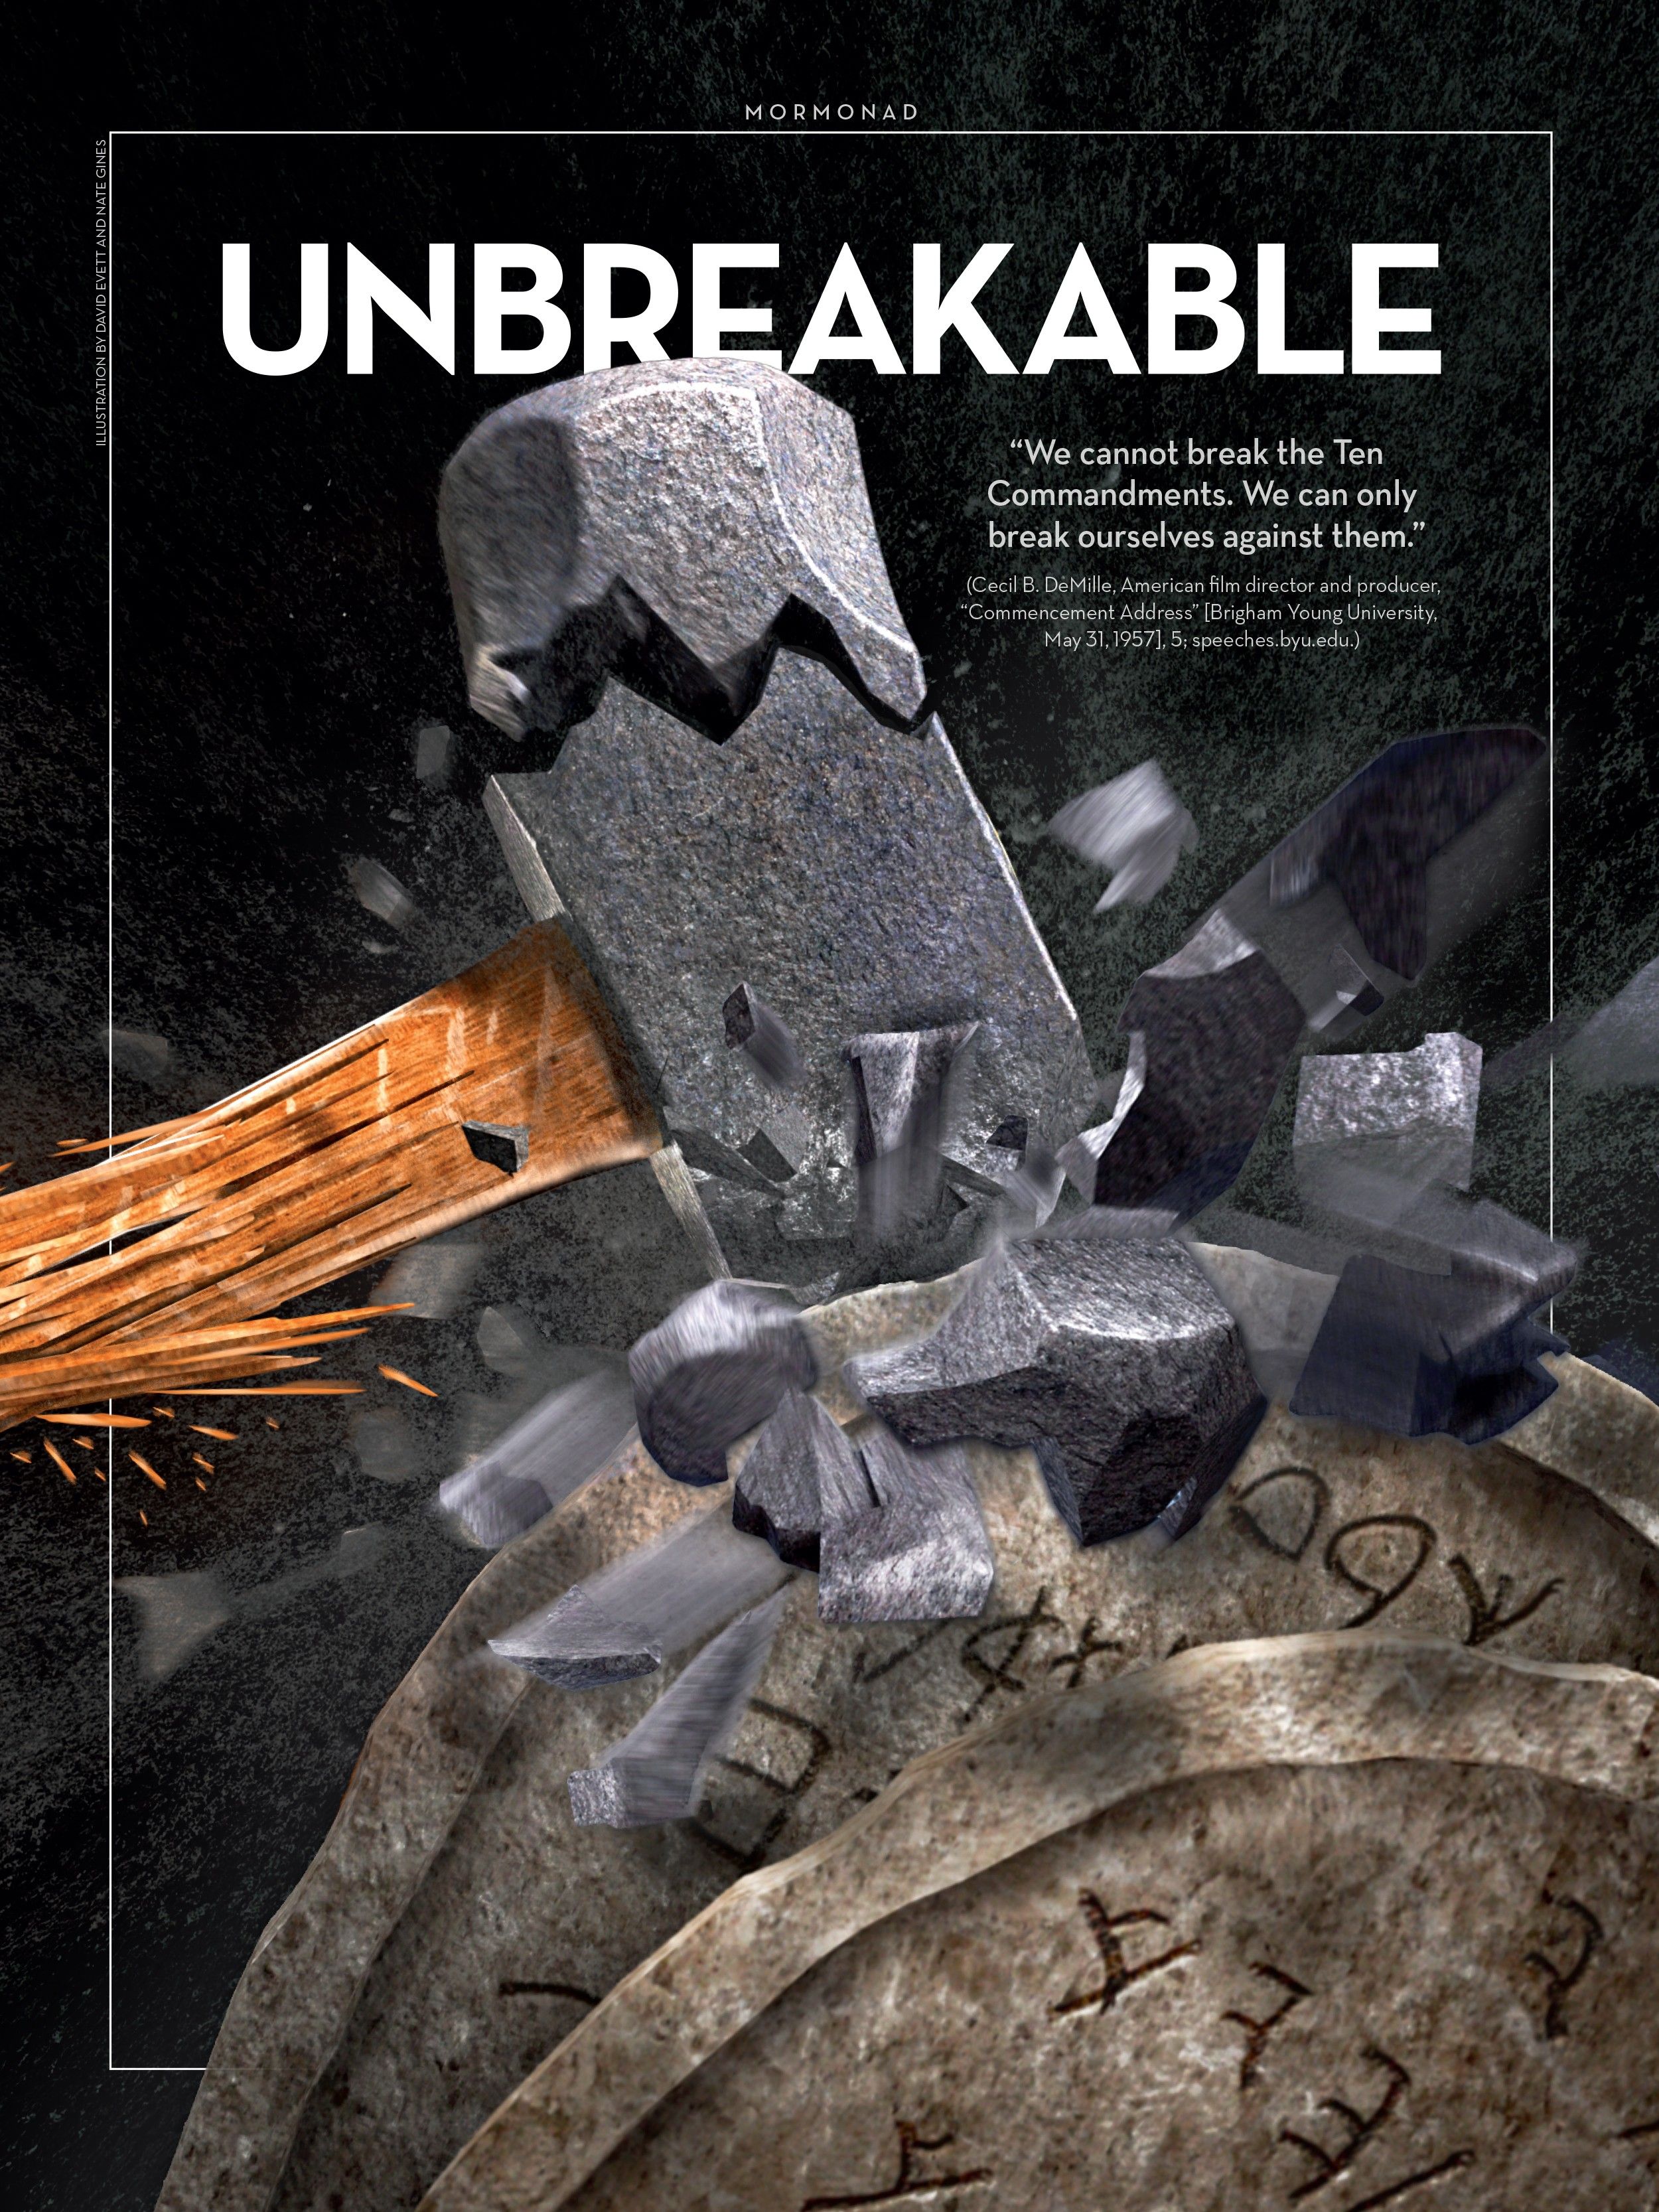 Unbreakable. "We cannot break the Ten Commandments. We can only break ourselves against them." (Cecil B. DeMille, American film director and producer, "Commencement Address" [Brigham Young University, May 31, 1957], 5; speeches.byu.edu.) June 2014